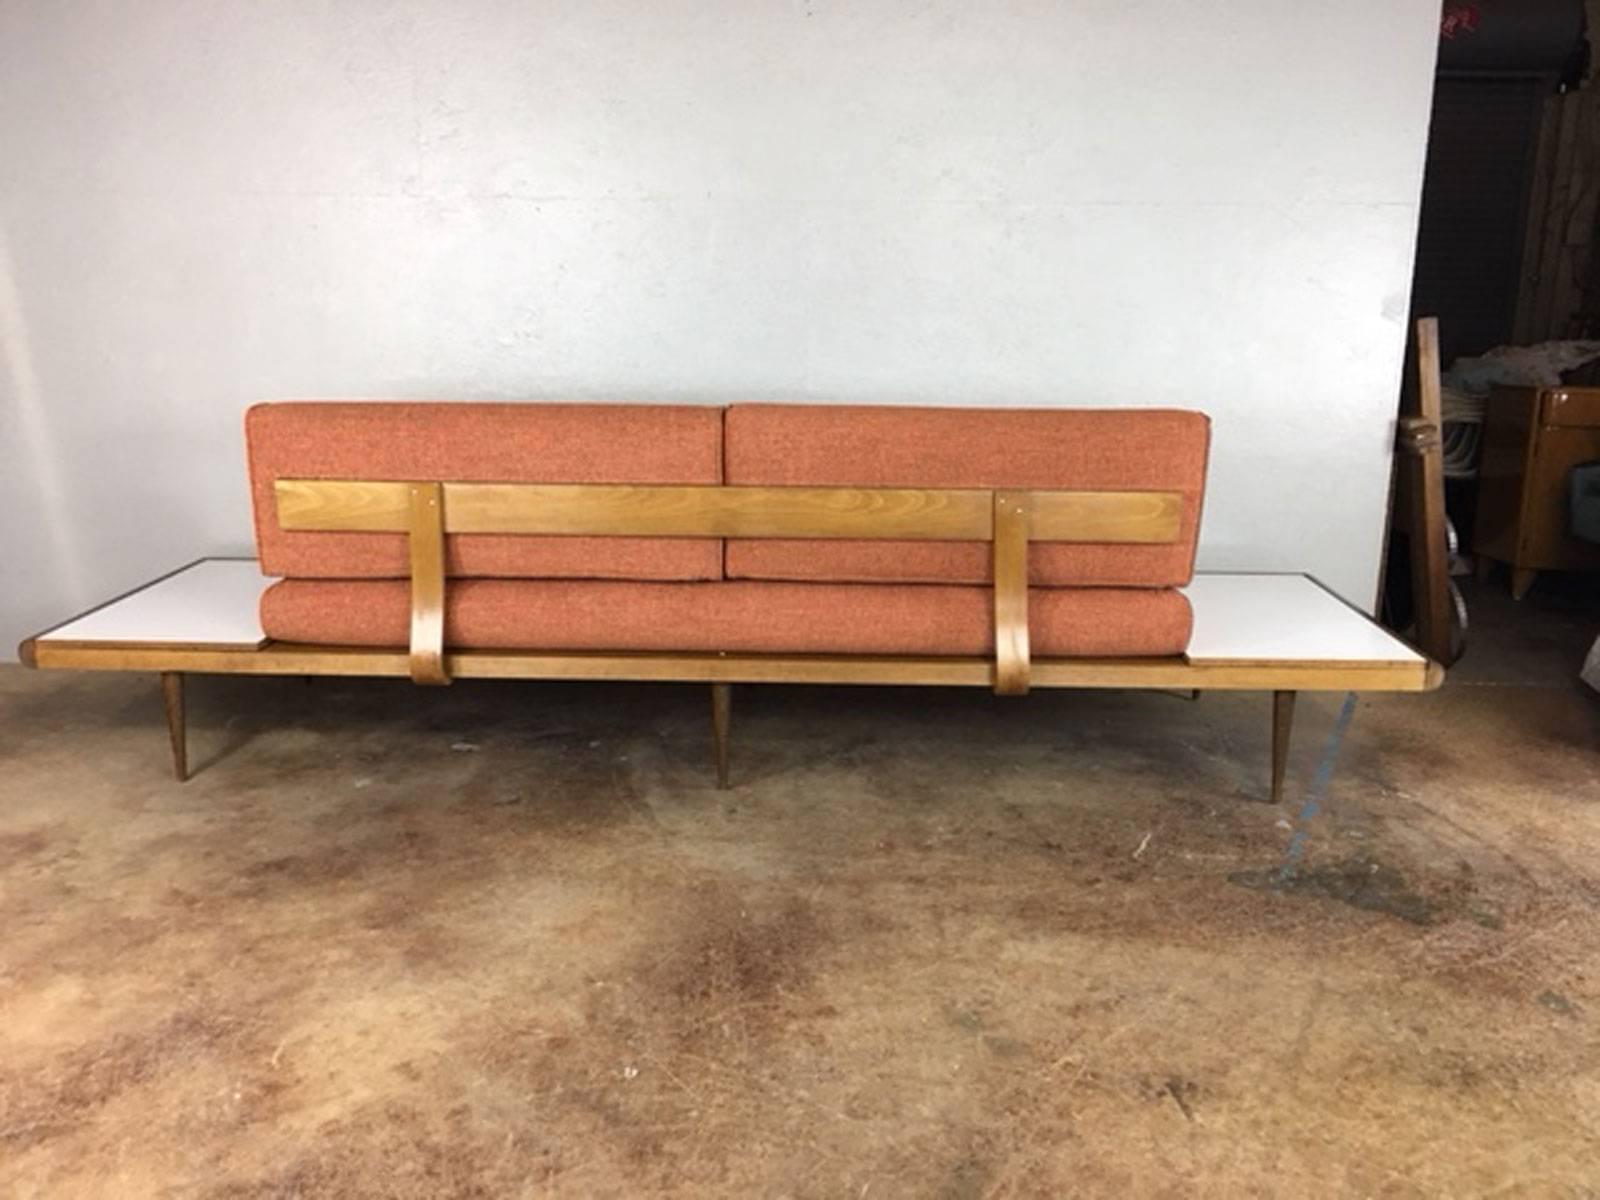 Sharp Adrain Pearsall sofa or daybed with built in white Formica and walnut Formica reversible side tables. Newly reupholstered in a stunning California Urban Collection fabric. 

Measures: Seat height is 17 inches.